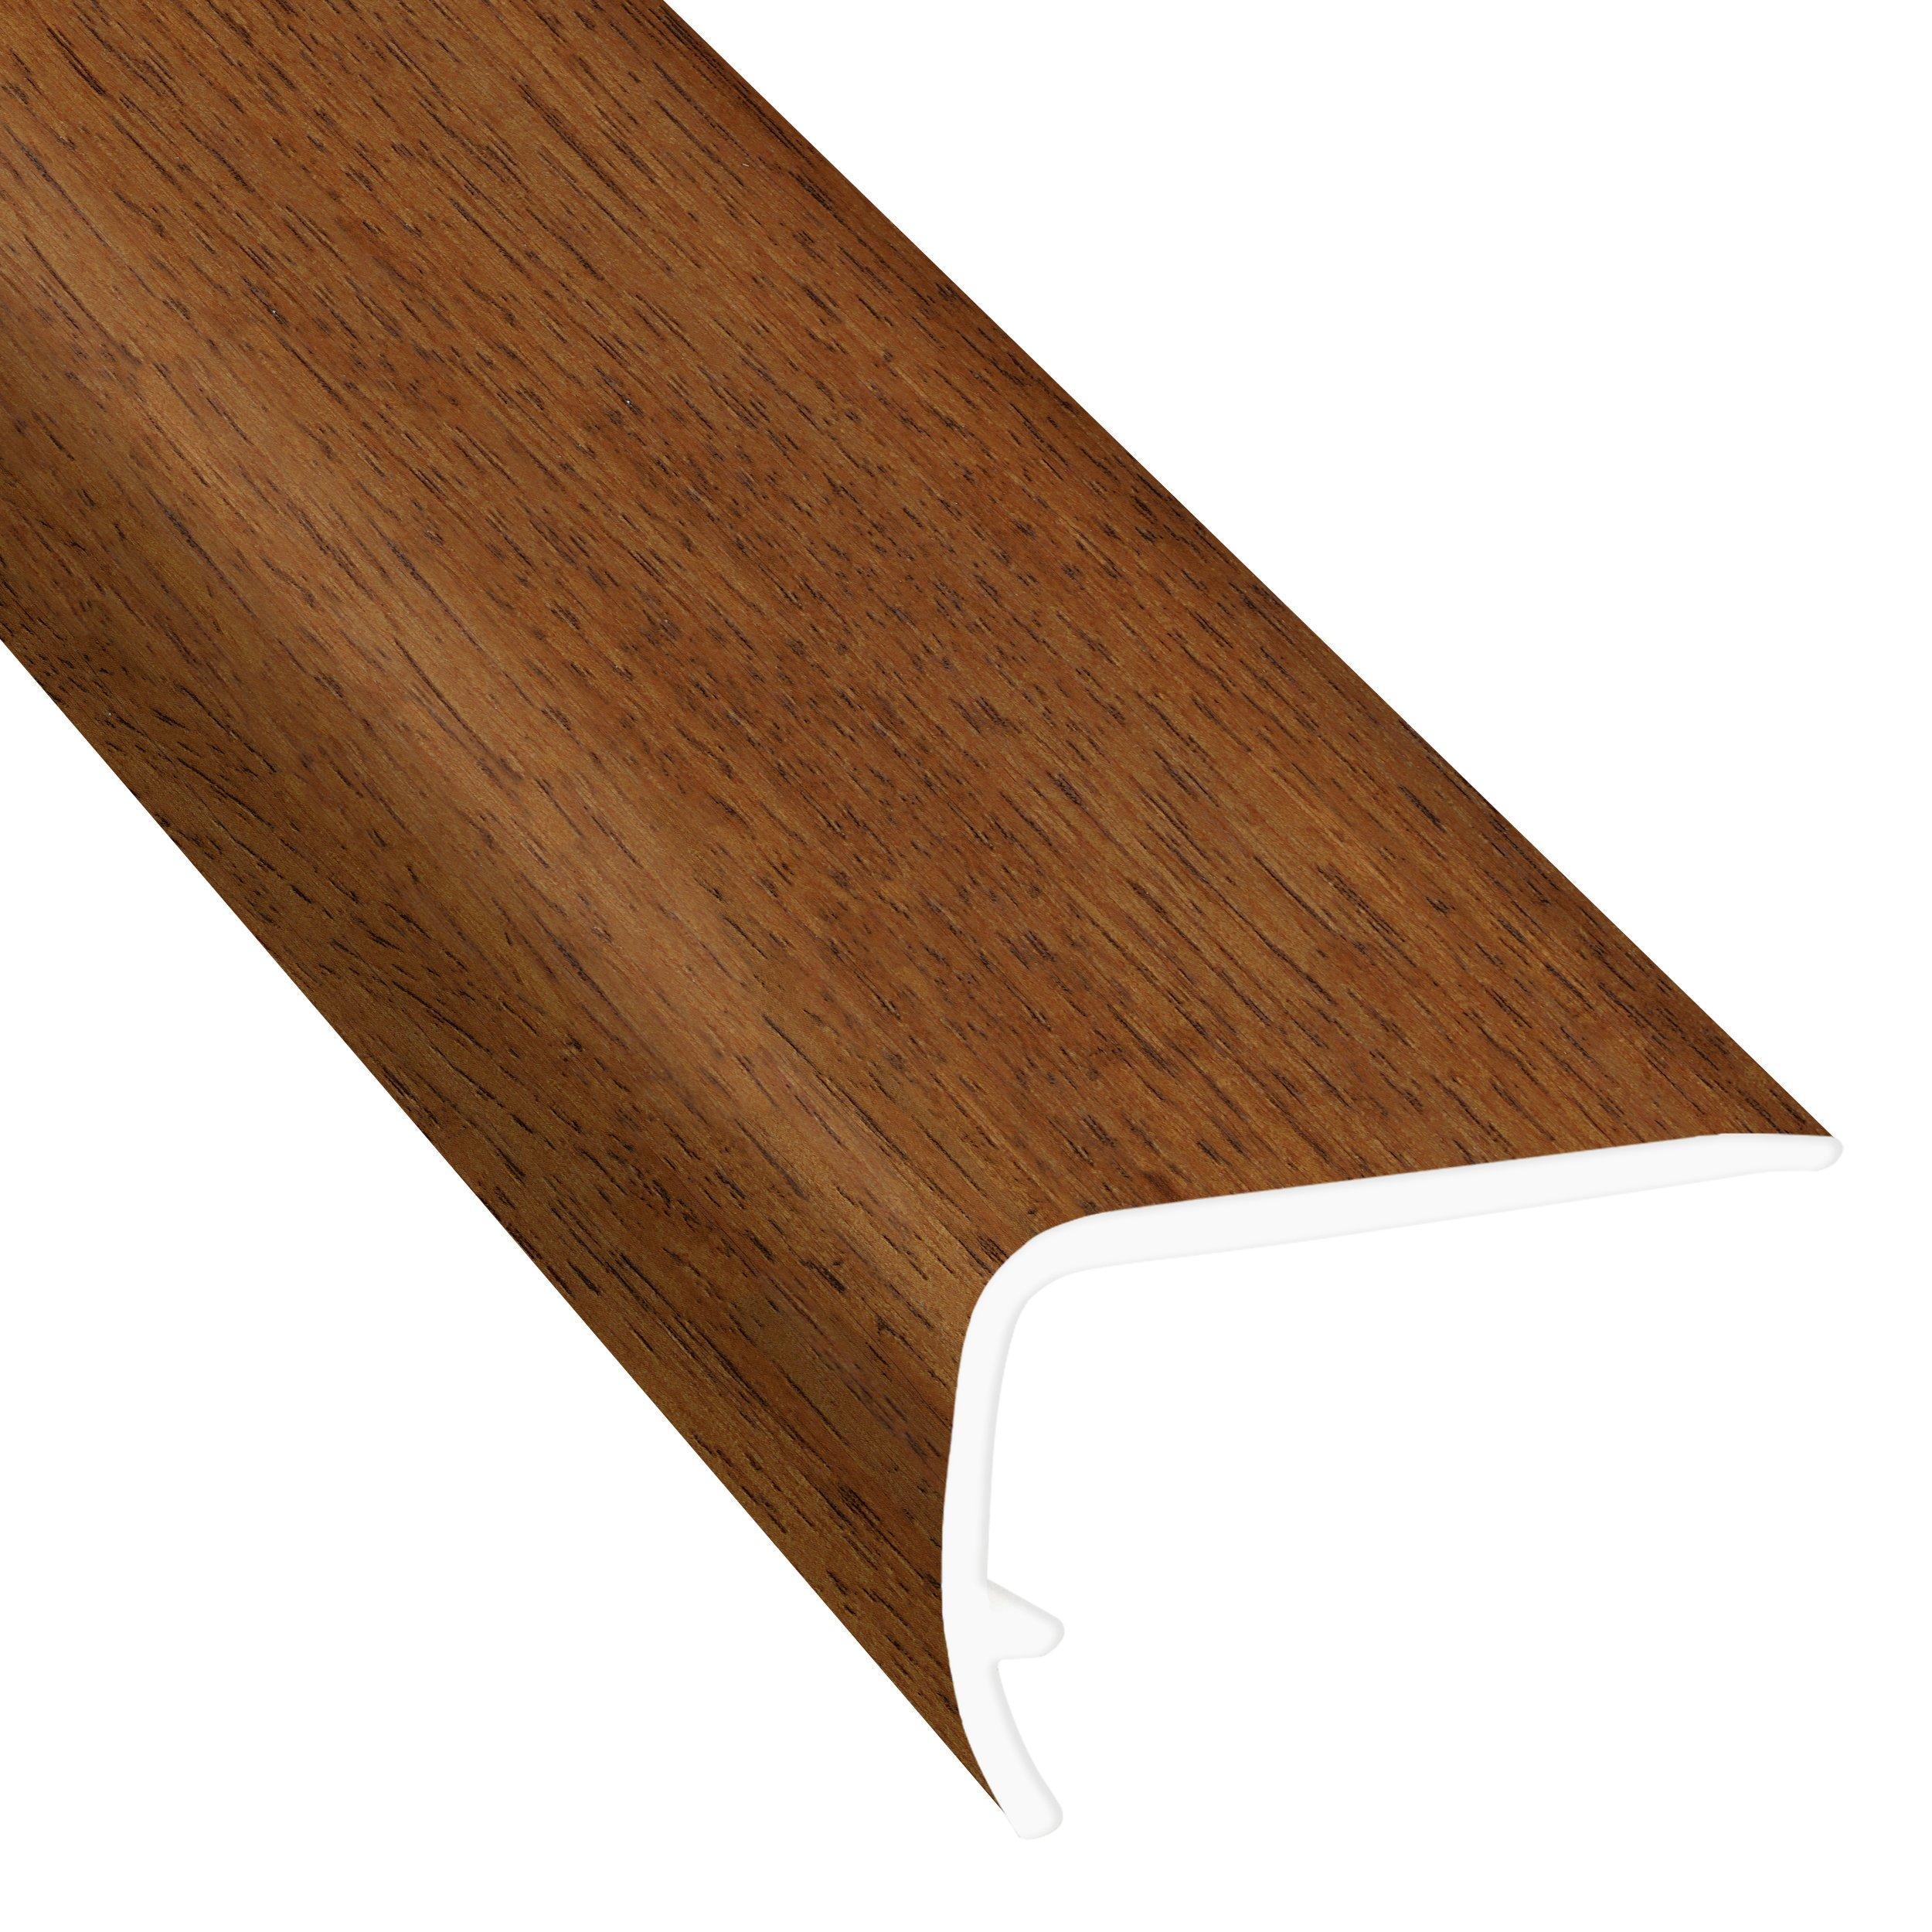 Espresso Hickory 94in. Vinyl Overlapping Stair Nose